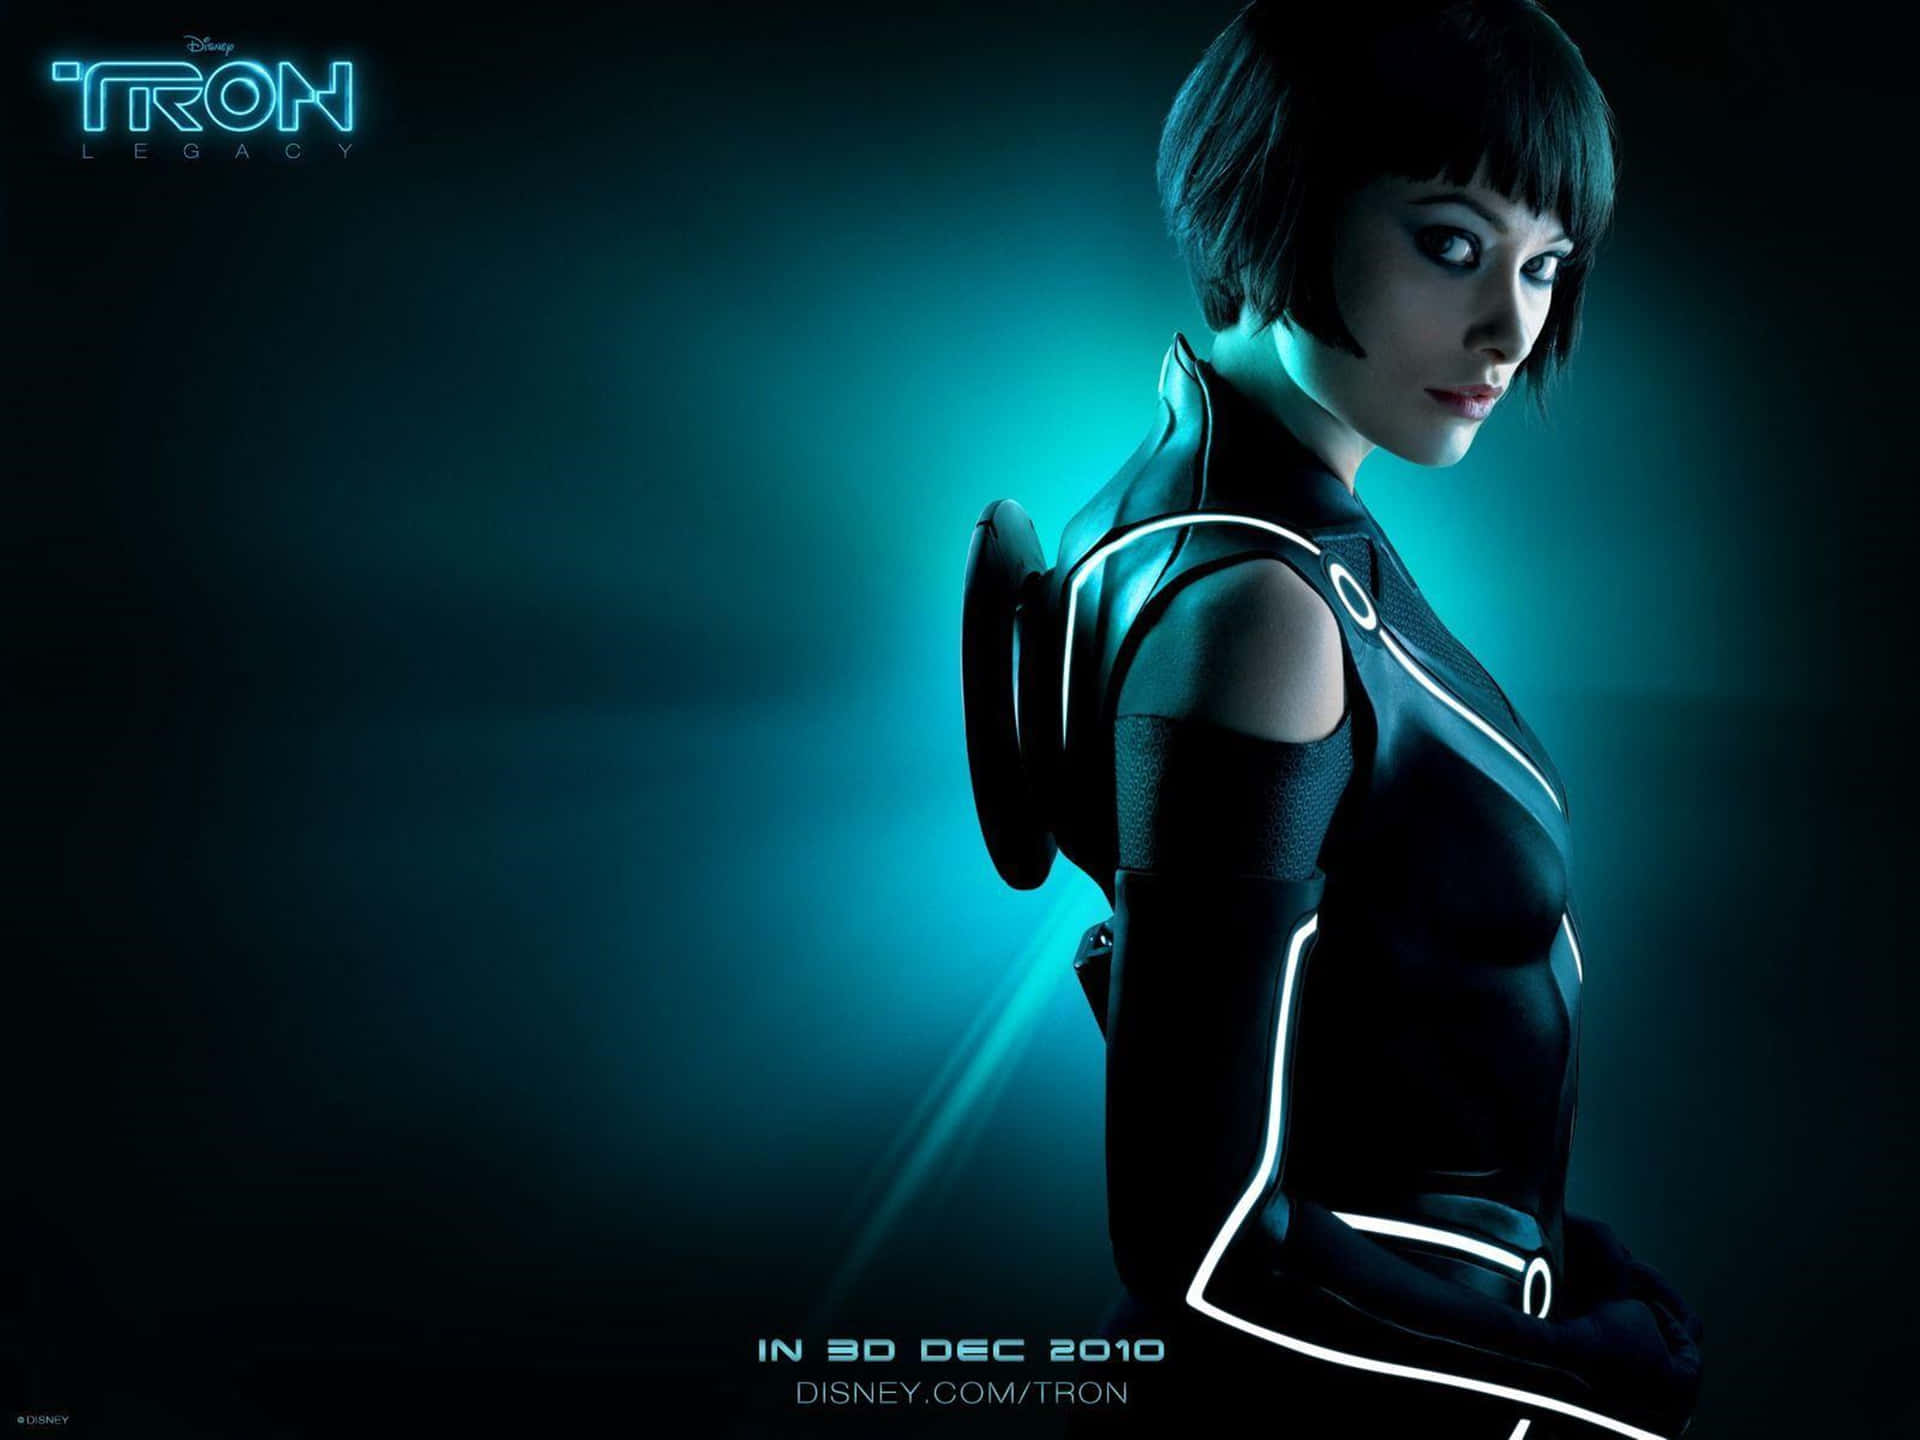 Tron Movie Poster With A Woman In A Neon Costume Wallpaper